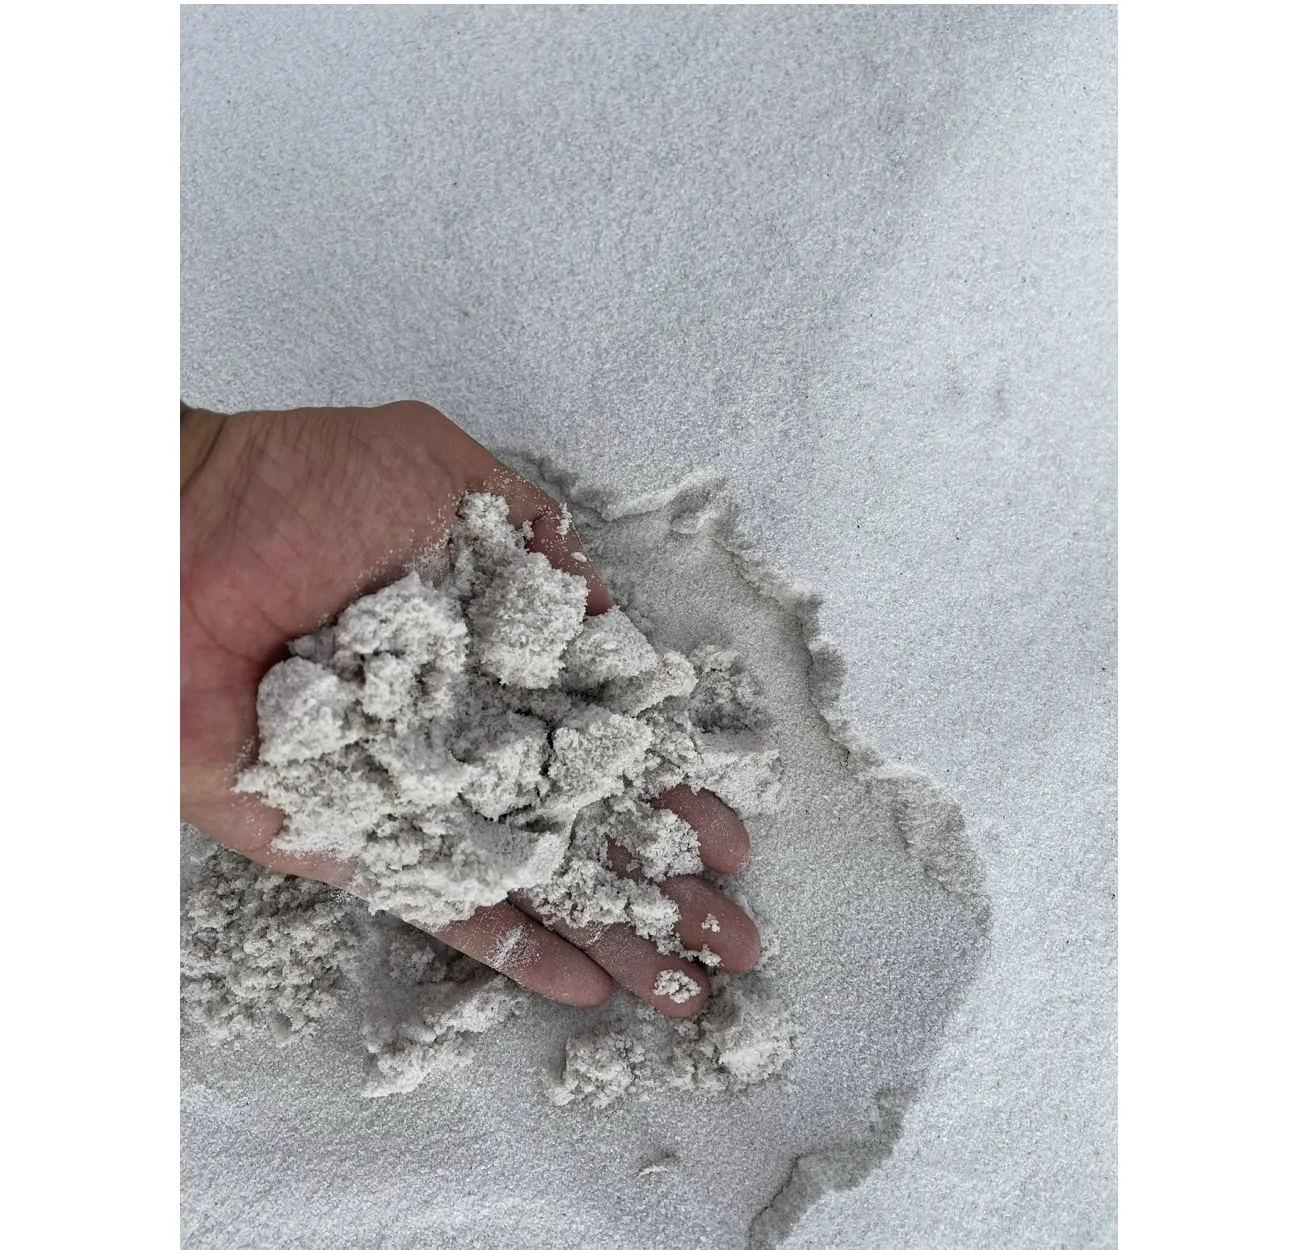 Hot sale High Purity White Sand Silica Sand for Investment Casting to make water filter material for wells, industry and